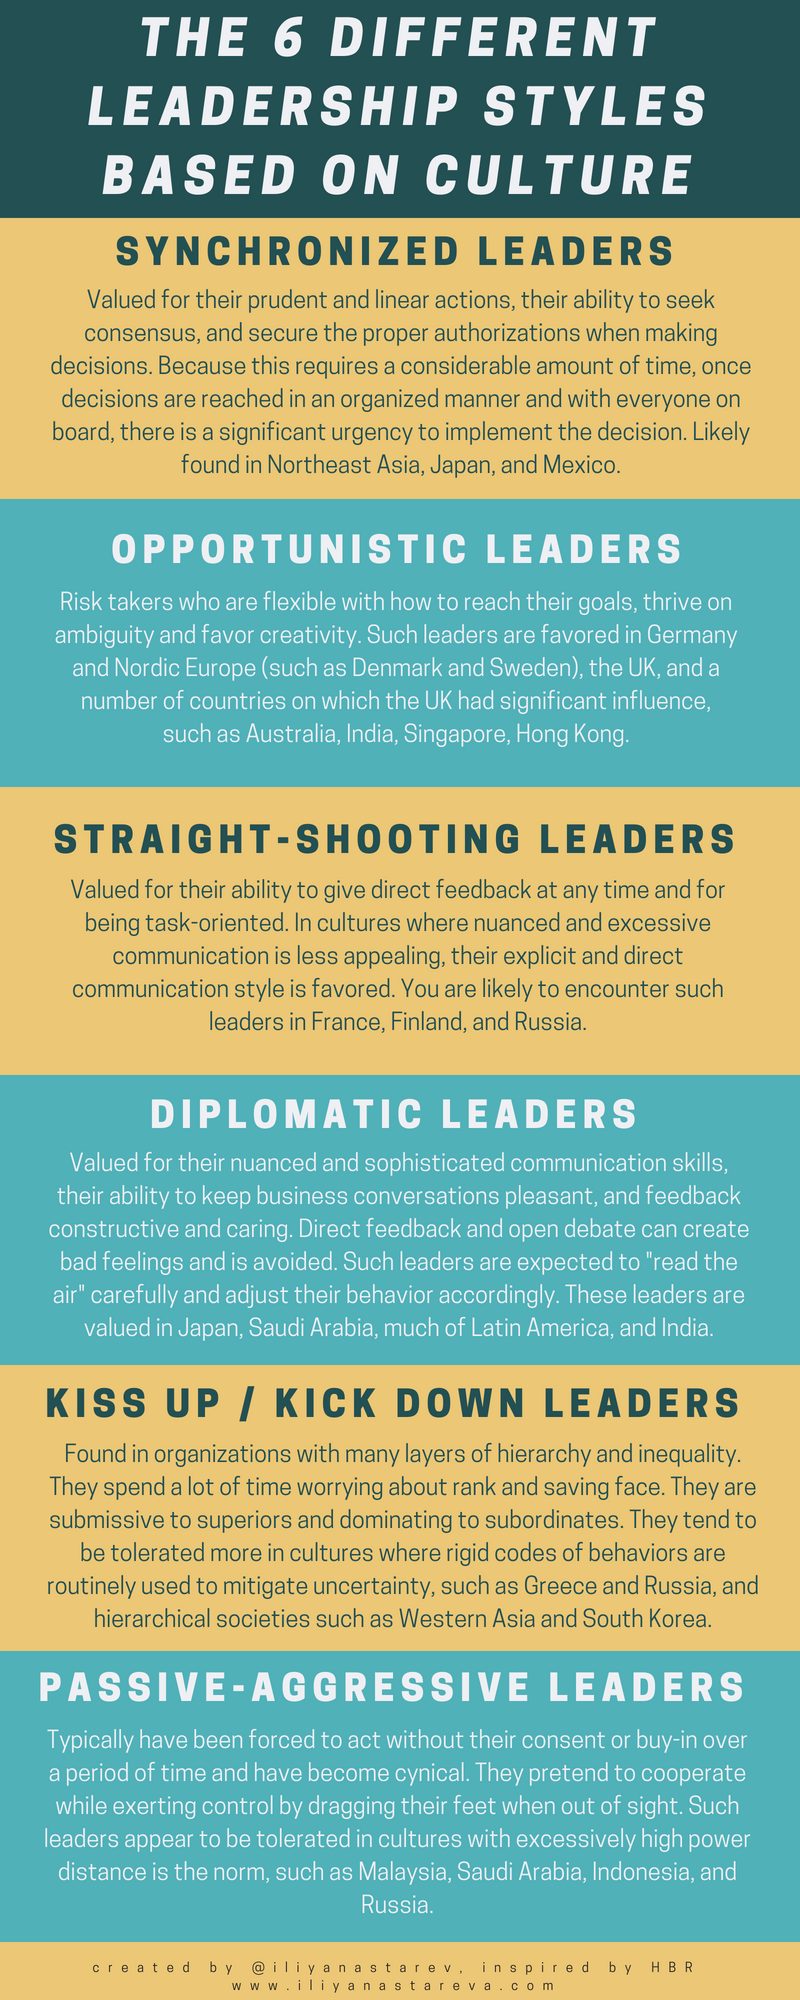 The 6 Different Leadership Styles Based on Culture [Infographic]